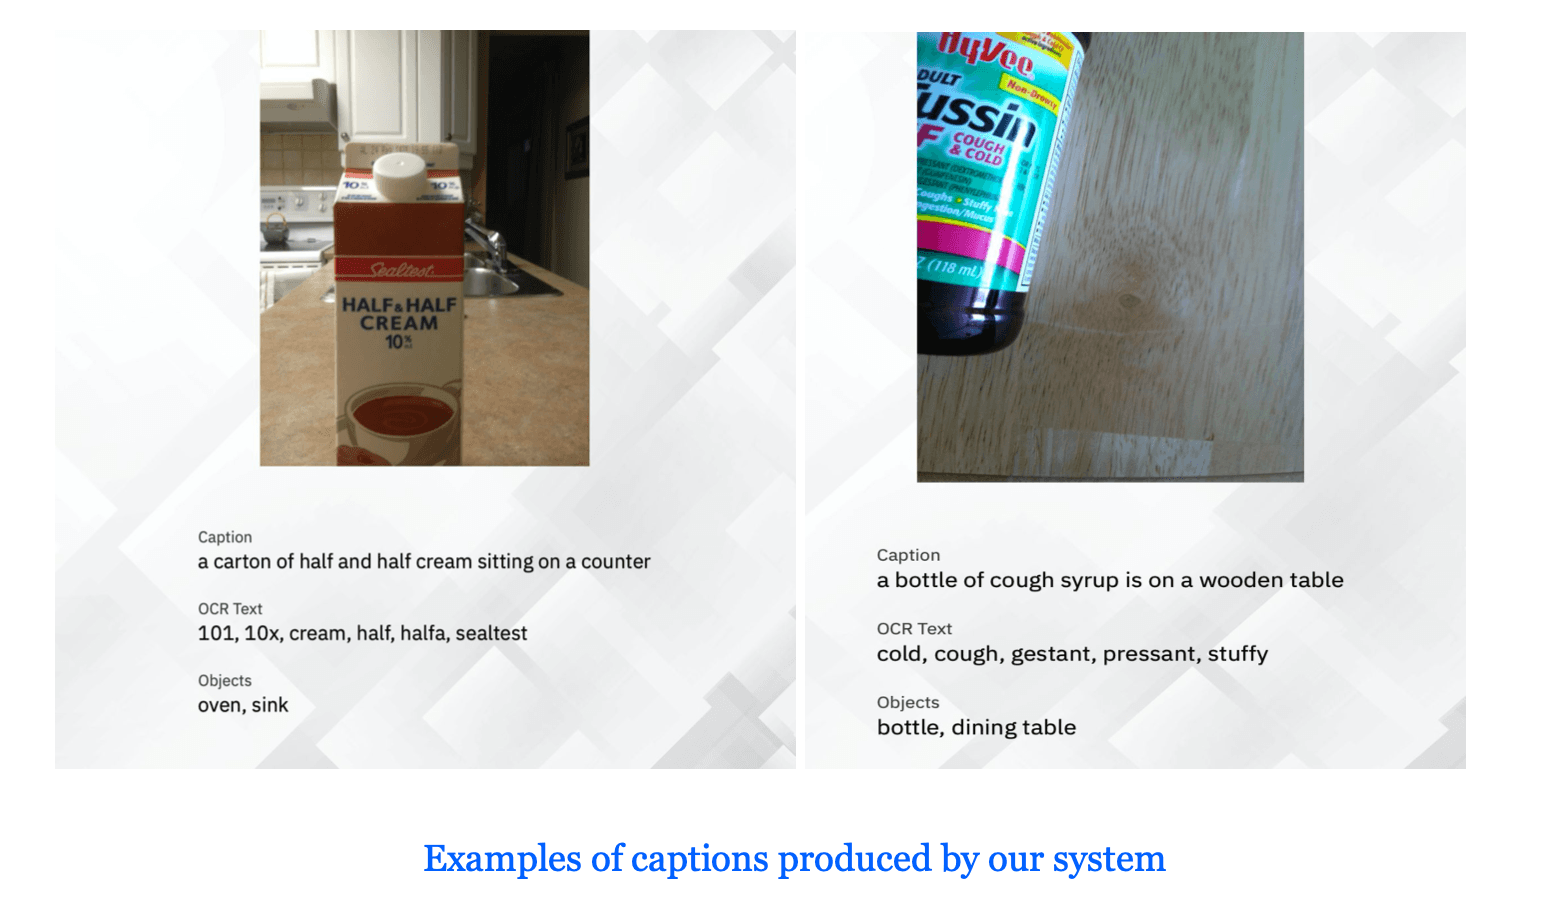 Examples of captions produced by the IBM captioning system.